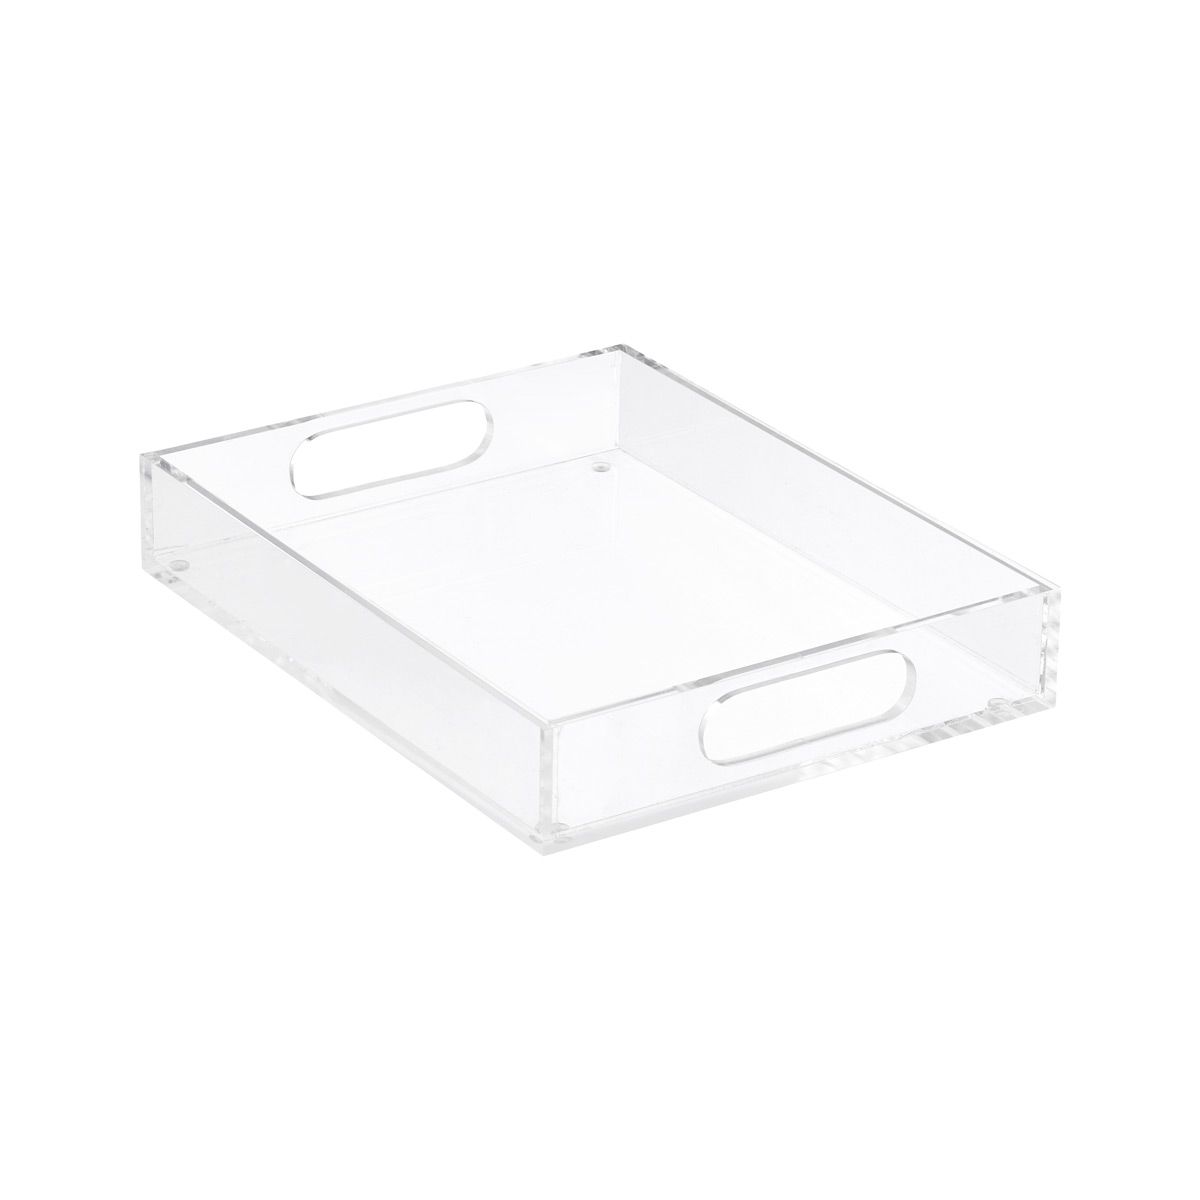 Premium Acrylic Tray | The Container Store